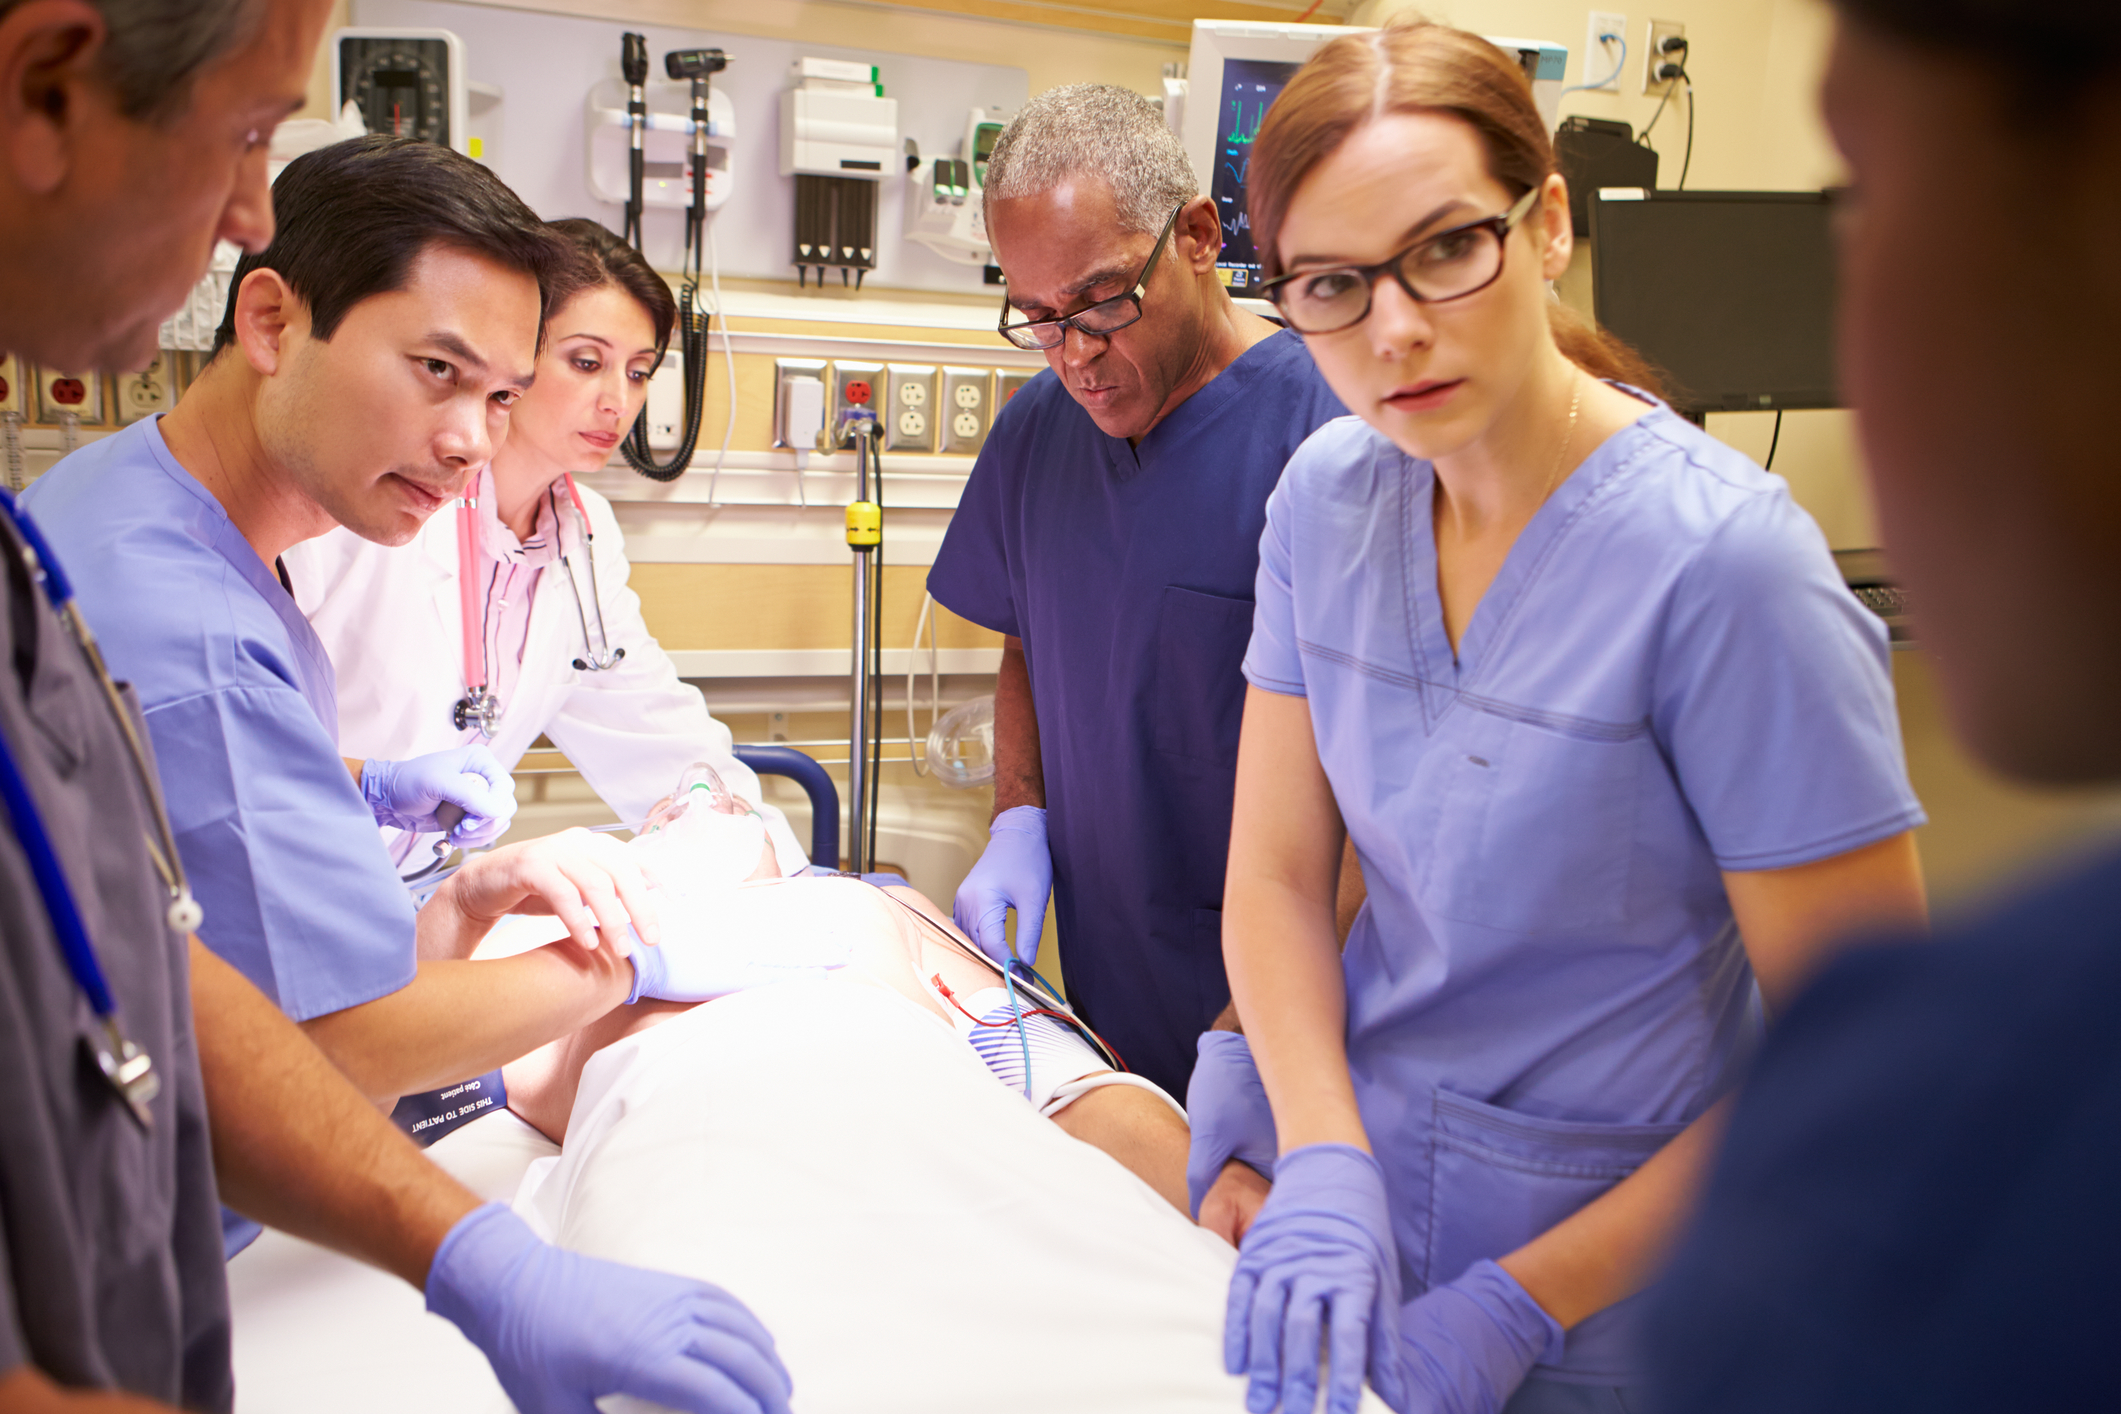 4 Emergency Medicine MOC Practice Questions To Prepare You